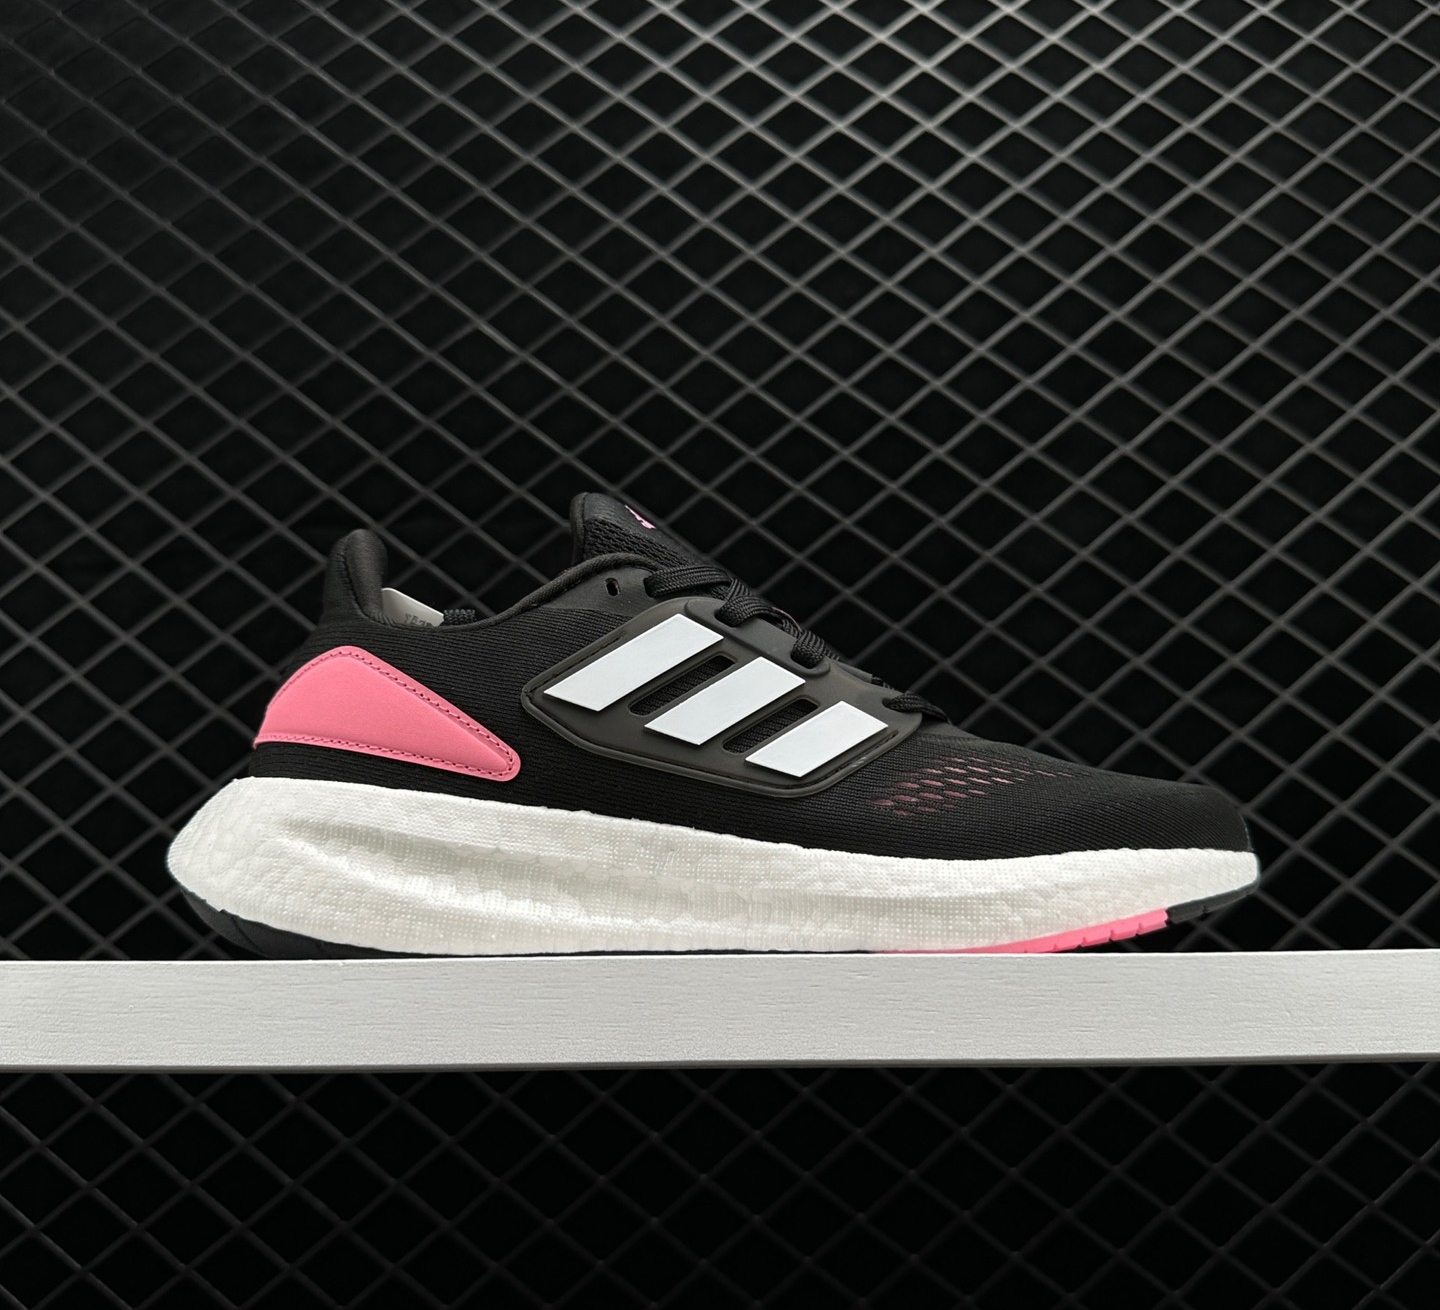 Adidas Pure Boost 22 Black Pink White HQ1458 - Stylish and Comfortable Athletic Shoes